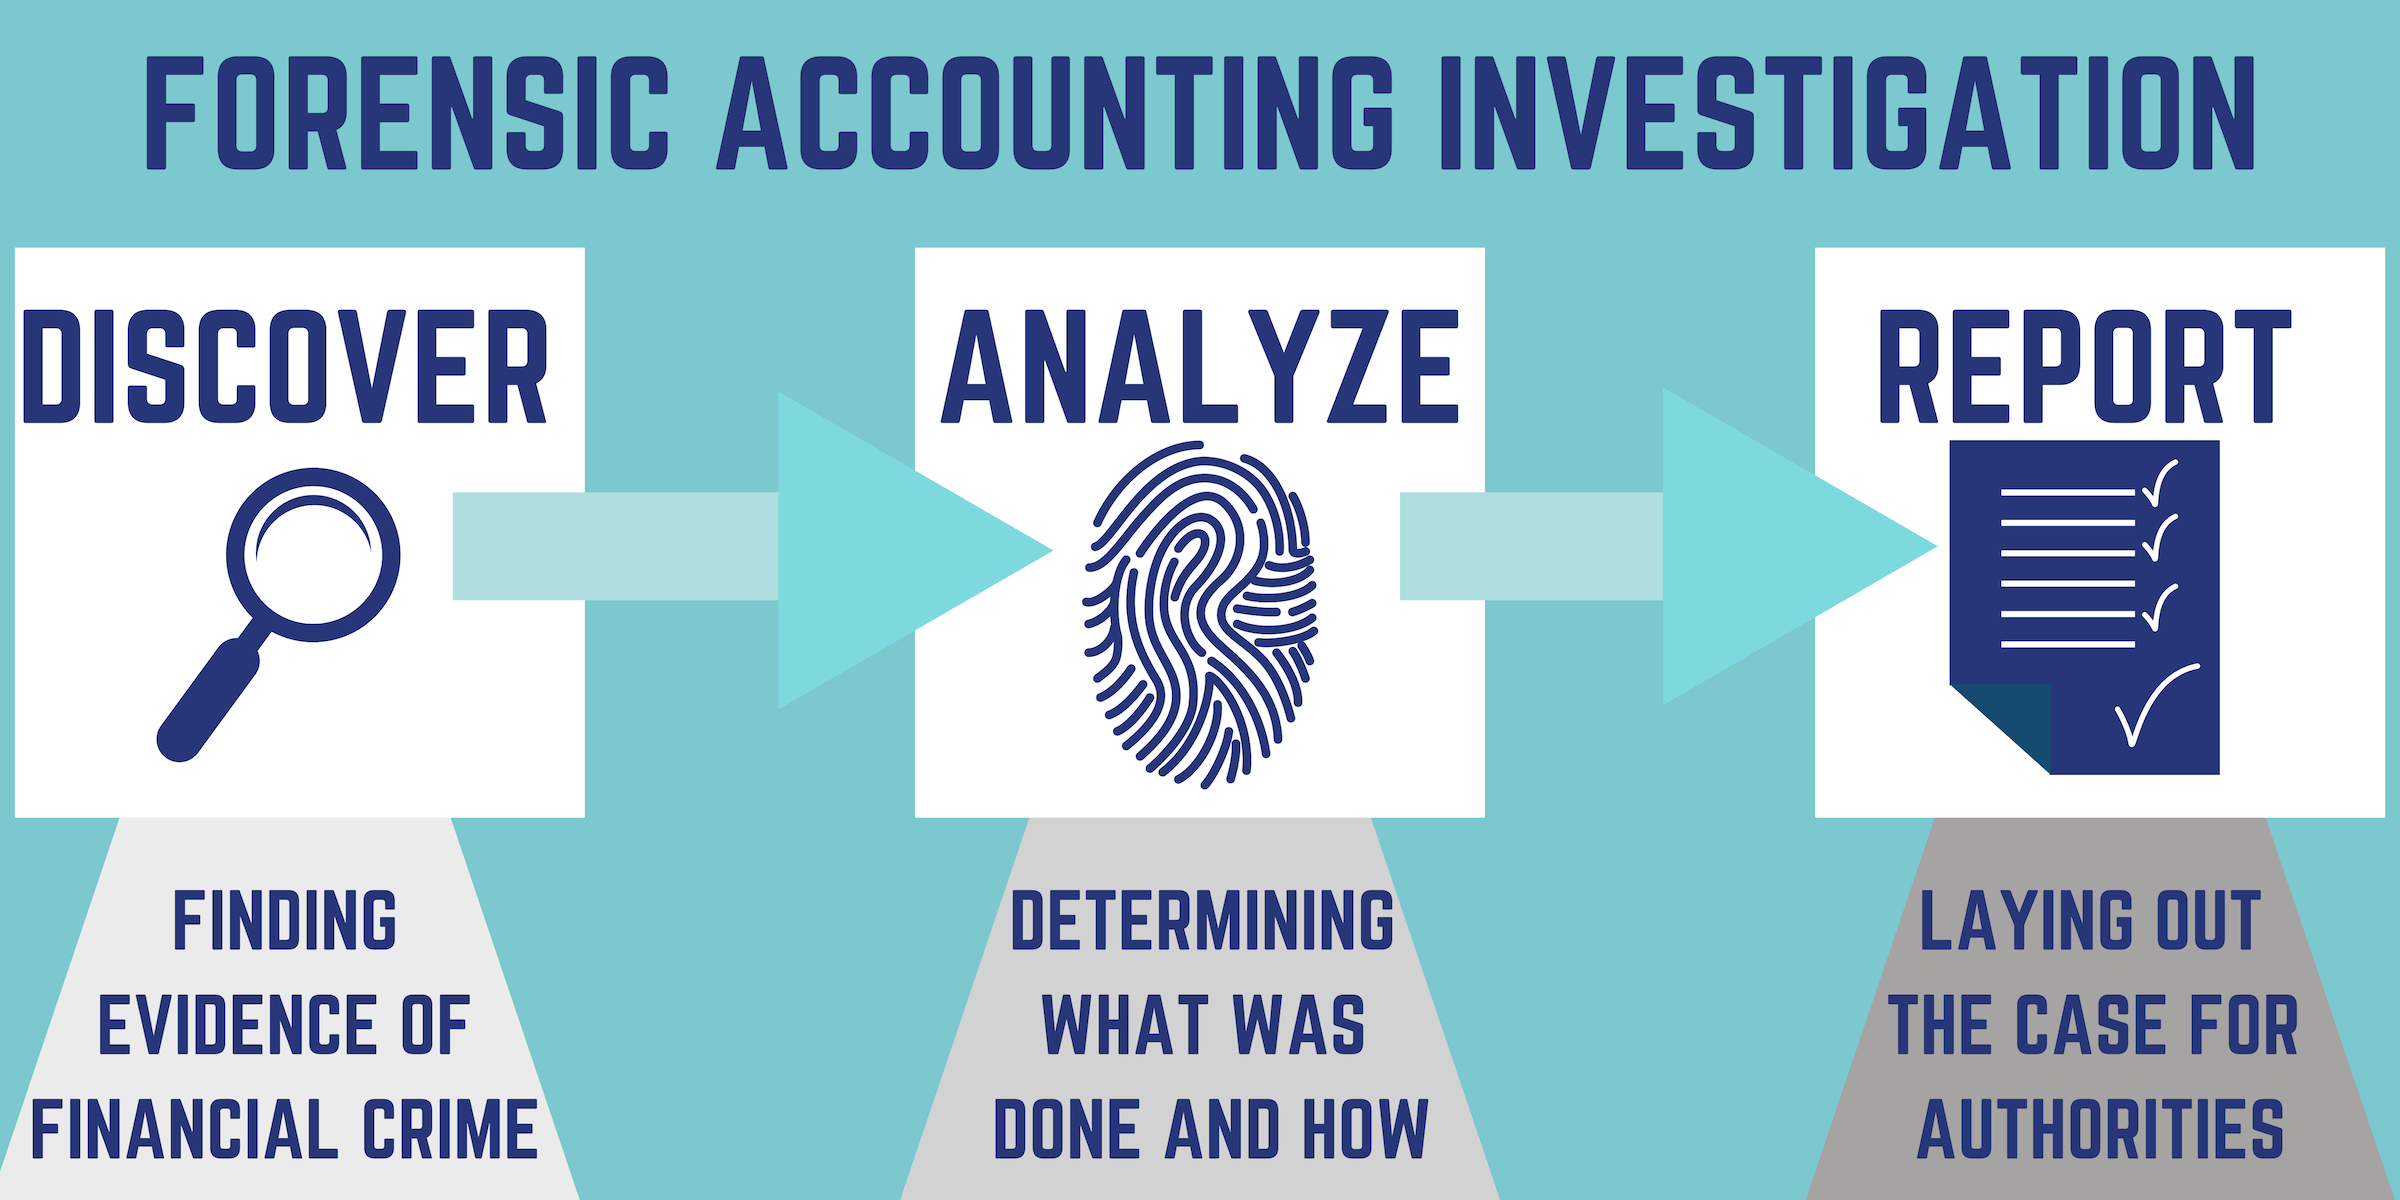 Forensic accounting investigation